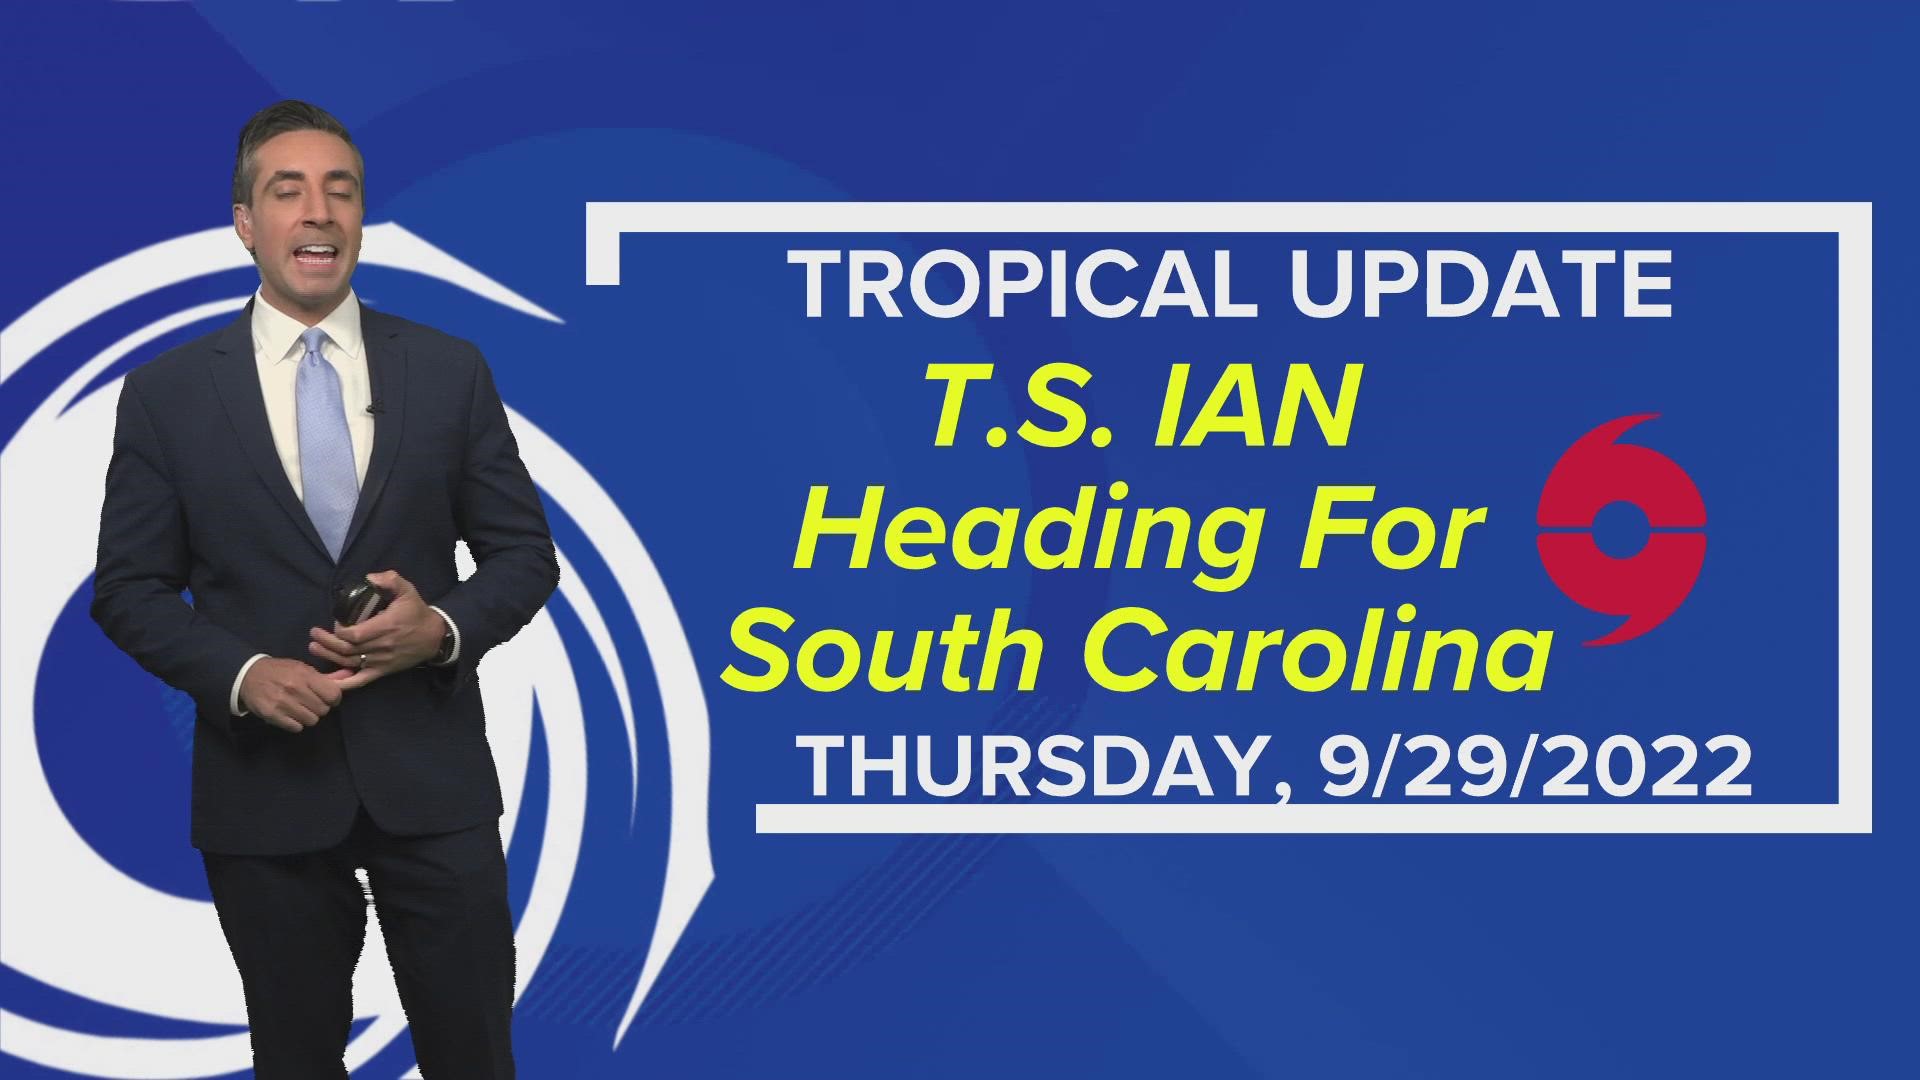 Ian has pushed offshore and is moving over warm waters. It will likely regain hurricane status as it makes its secondary U.S. landfall along the South Carolina coast